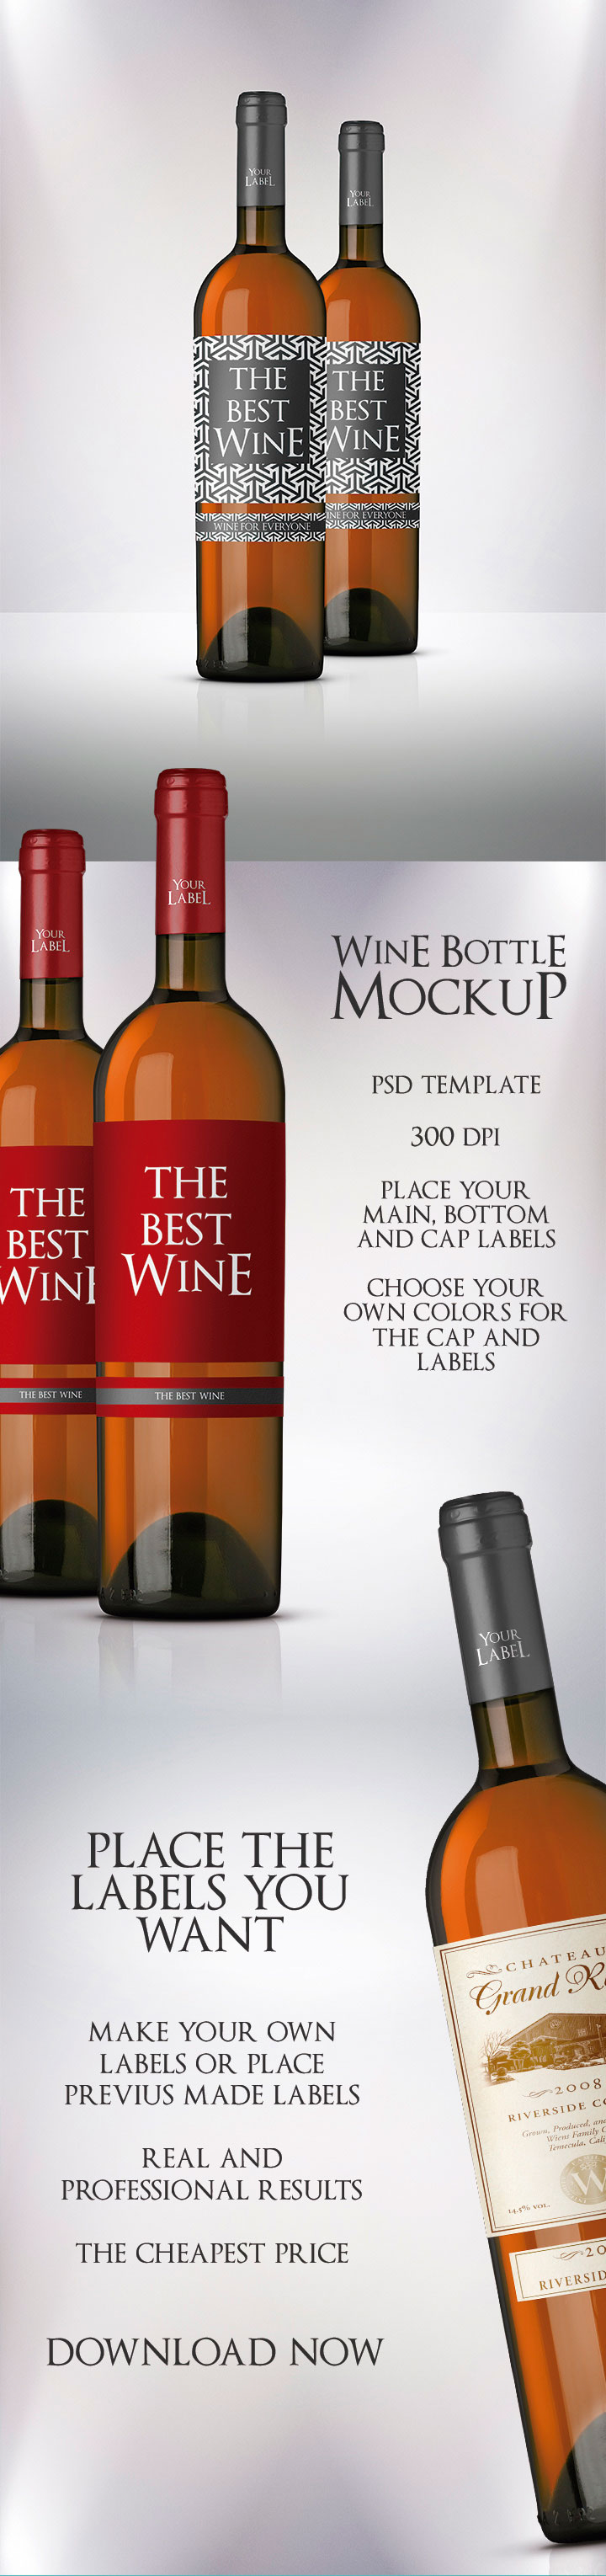 Download Wine Bottle Mockup Template PSD - Graphicfy